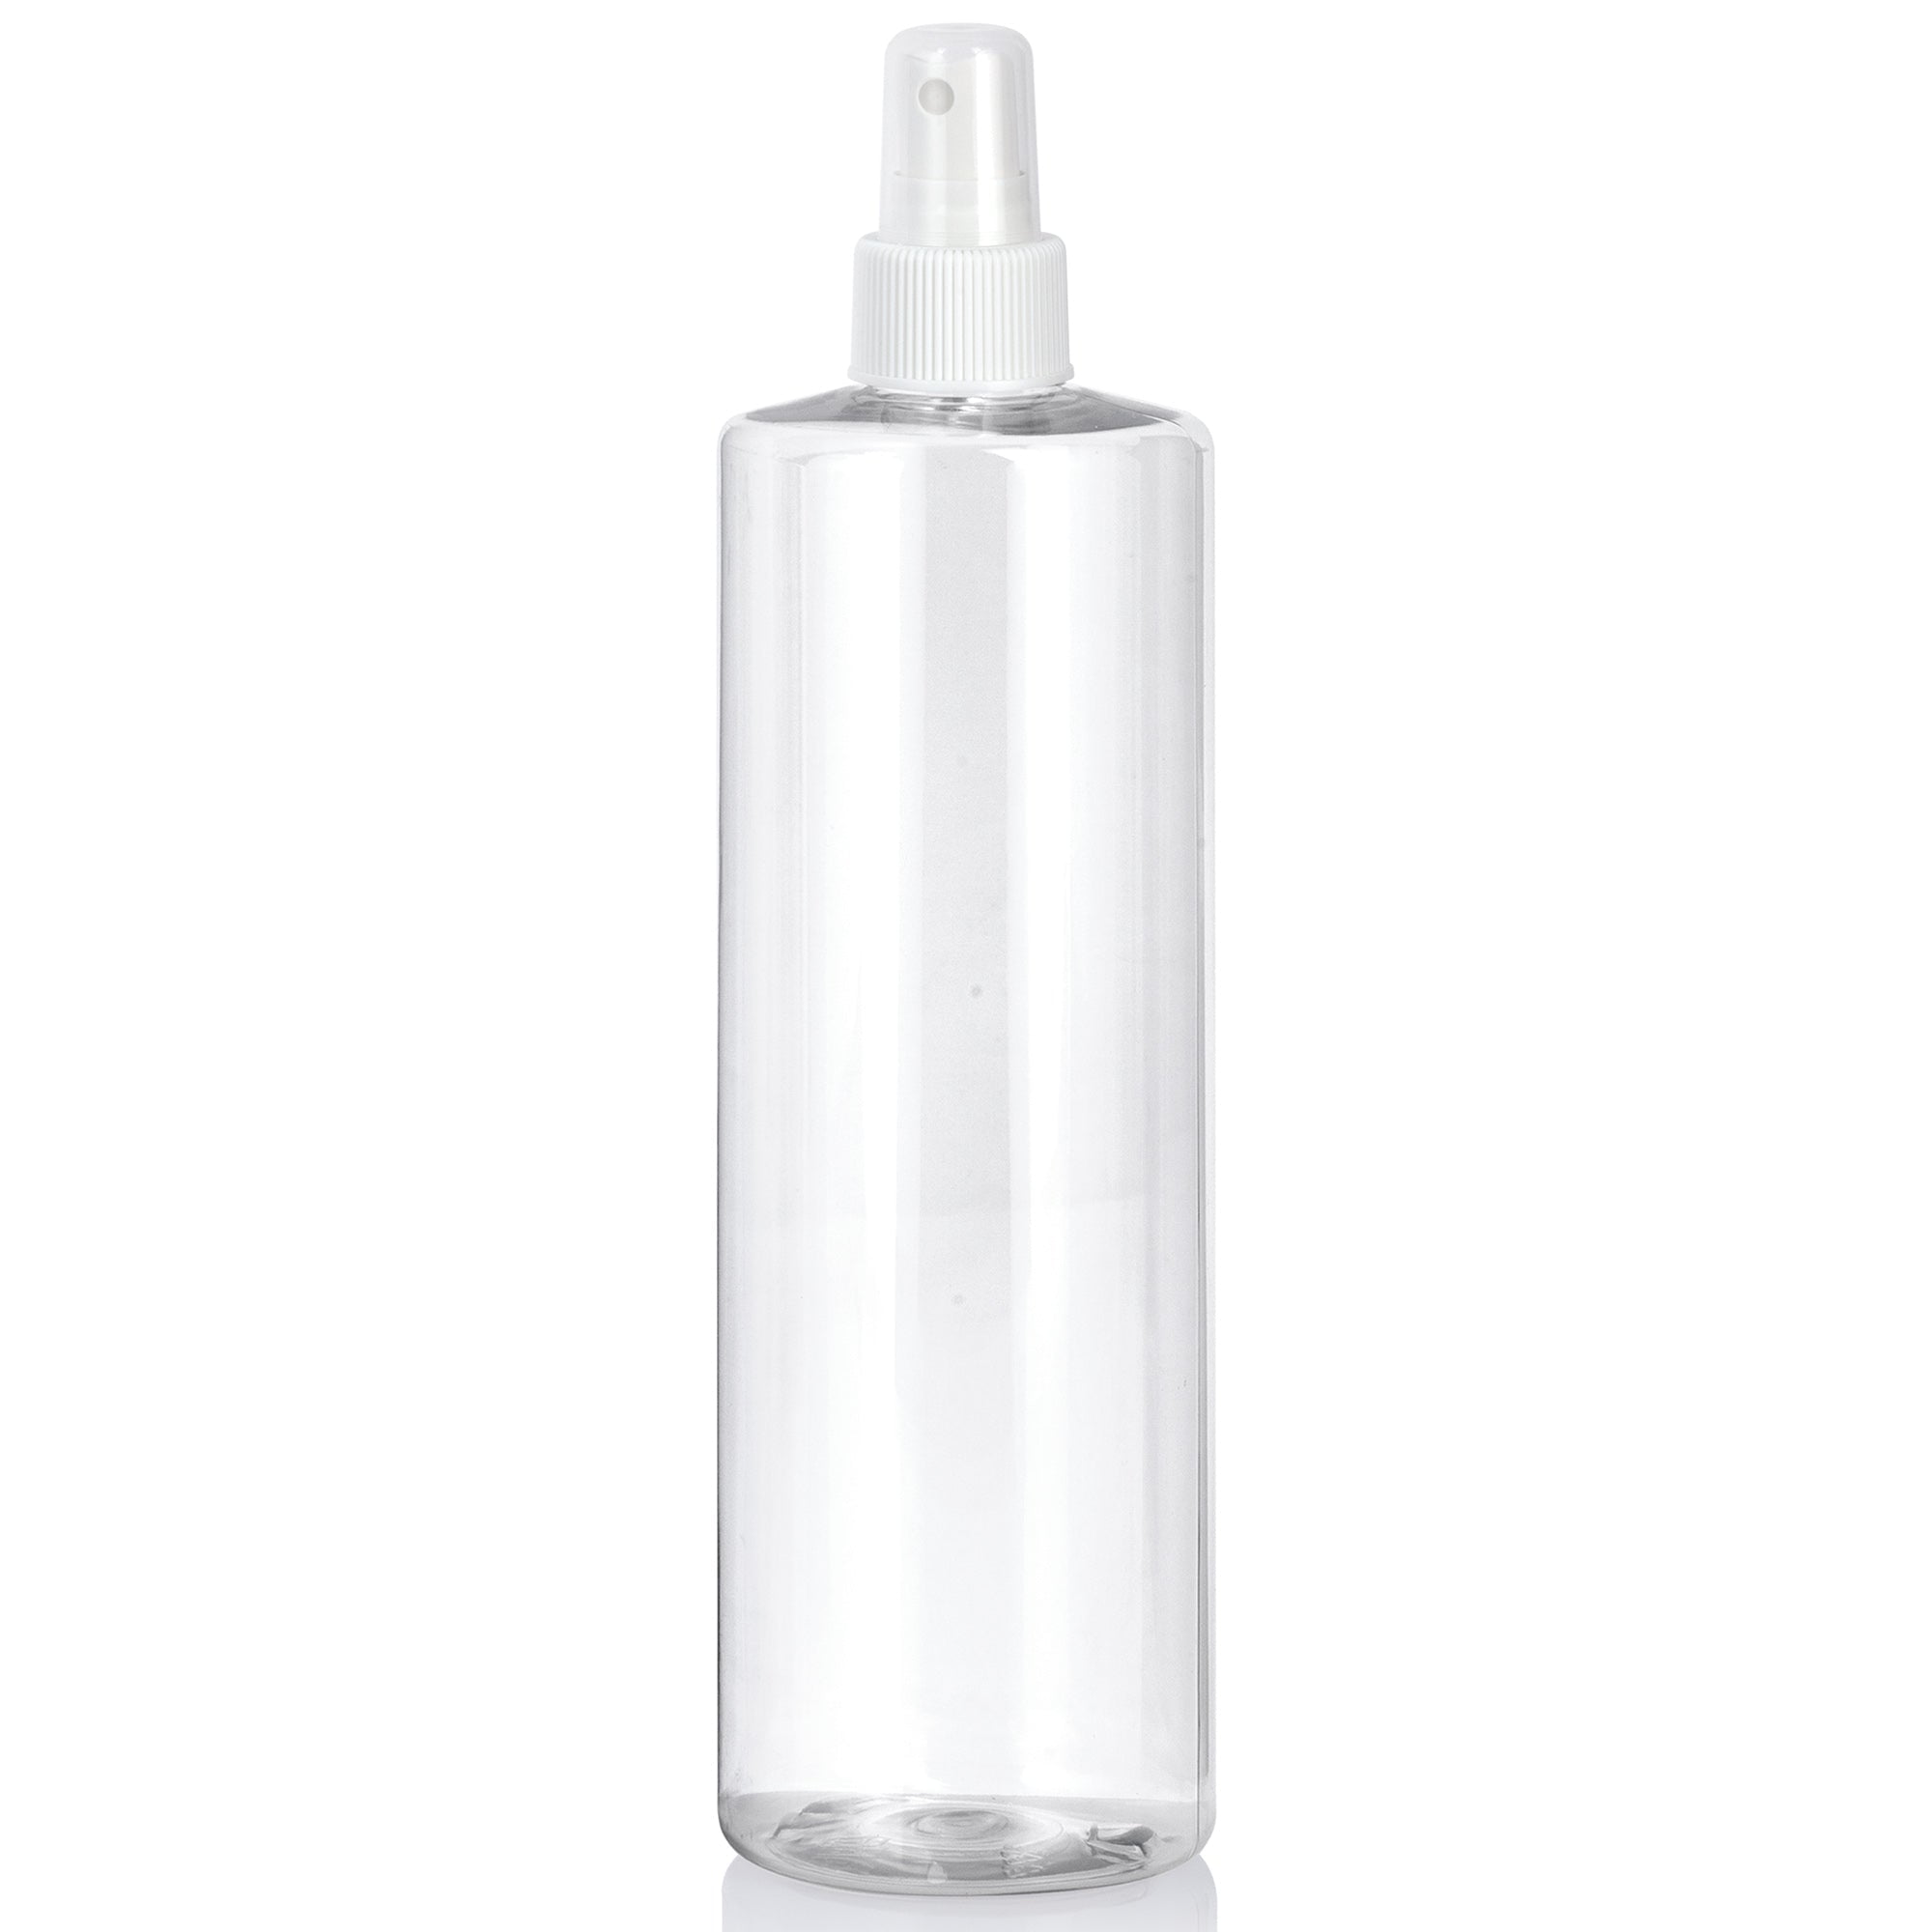 5.5 oz. (8 oz. Honey Weight) Cylinder PET Clear Sauce Bottle with